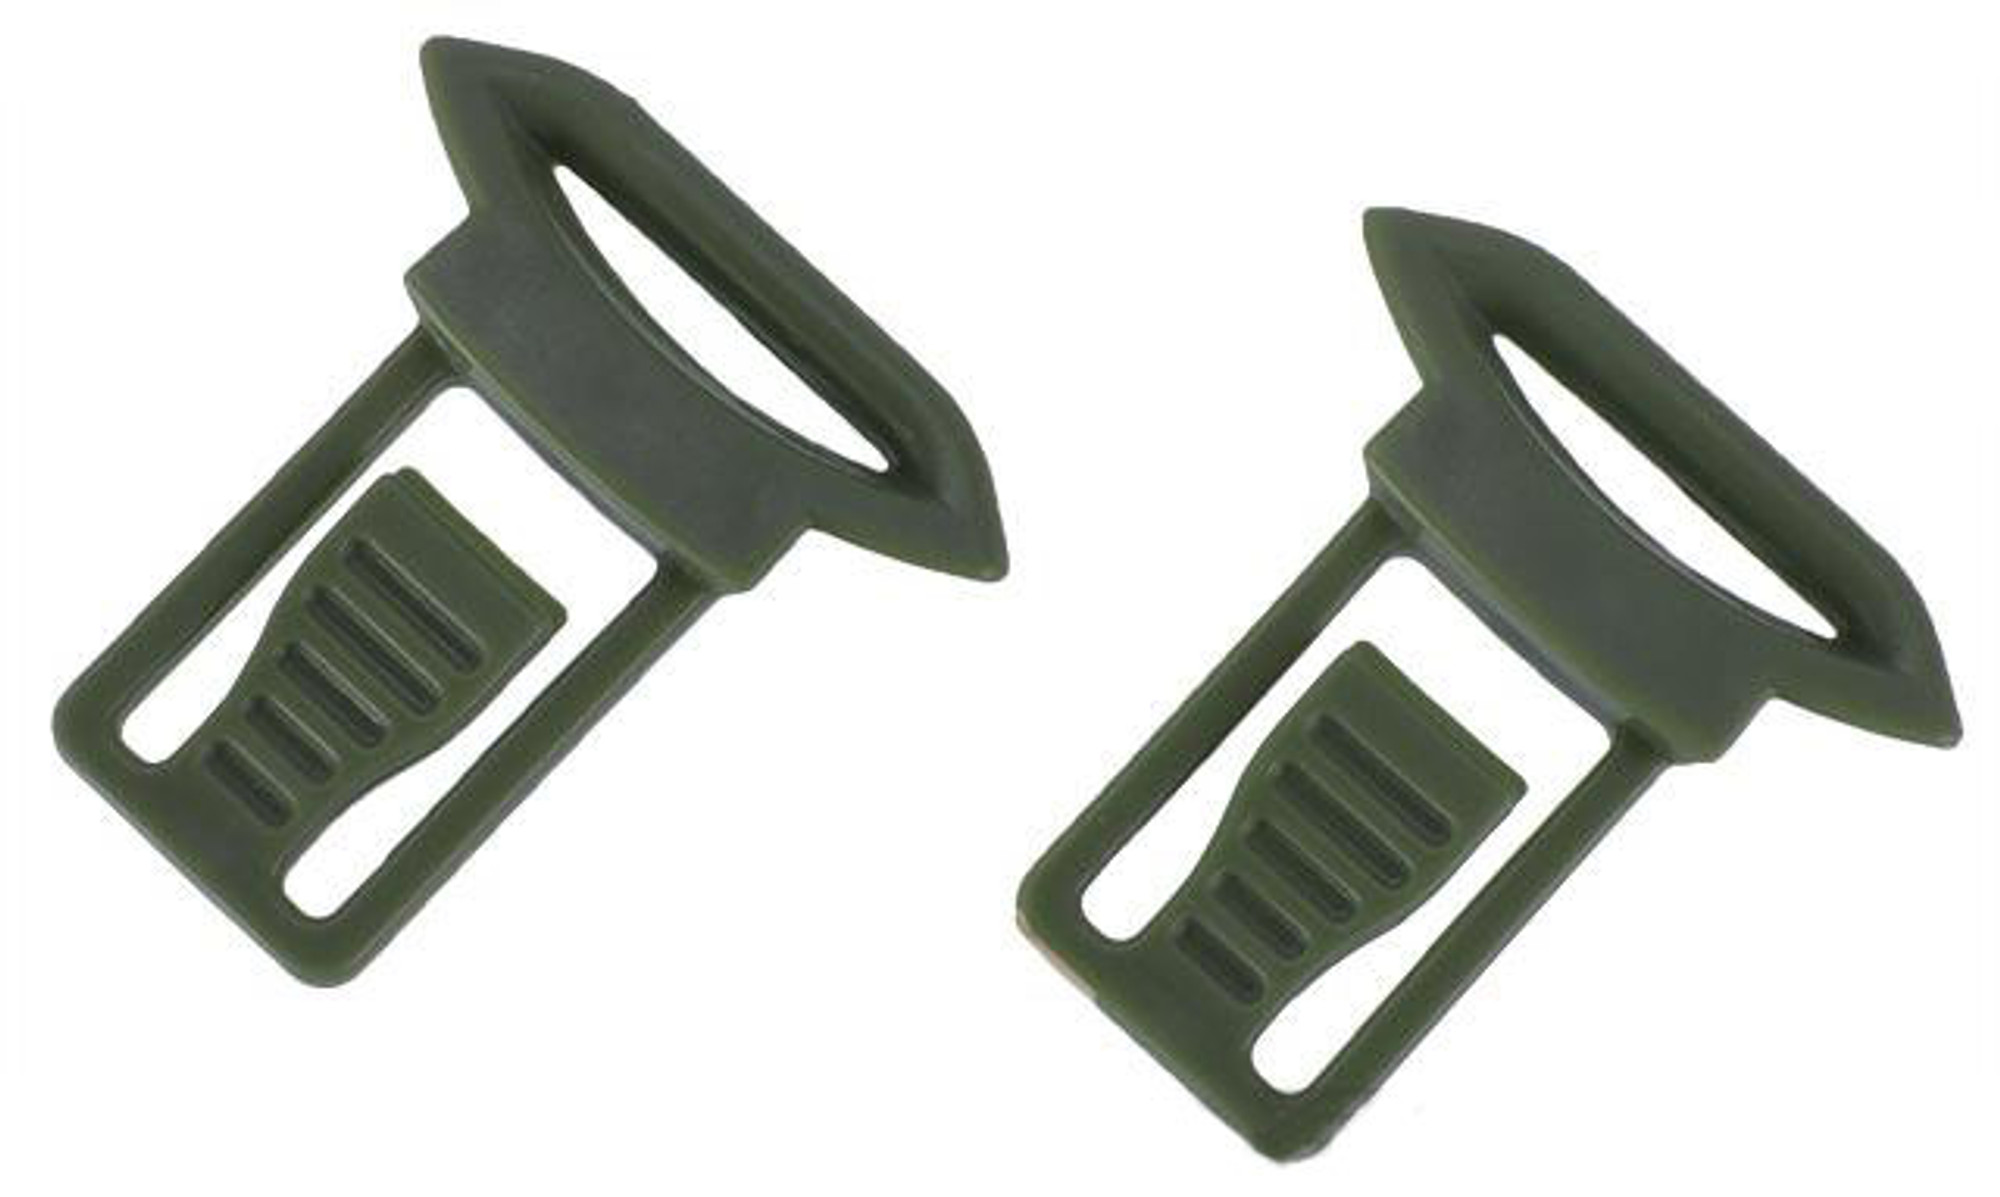 Emerson  Replacement Standard Strap Clips for Bump Helmet Rails - OD Green